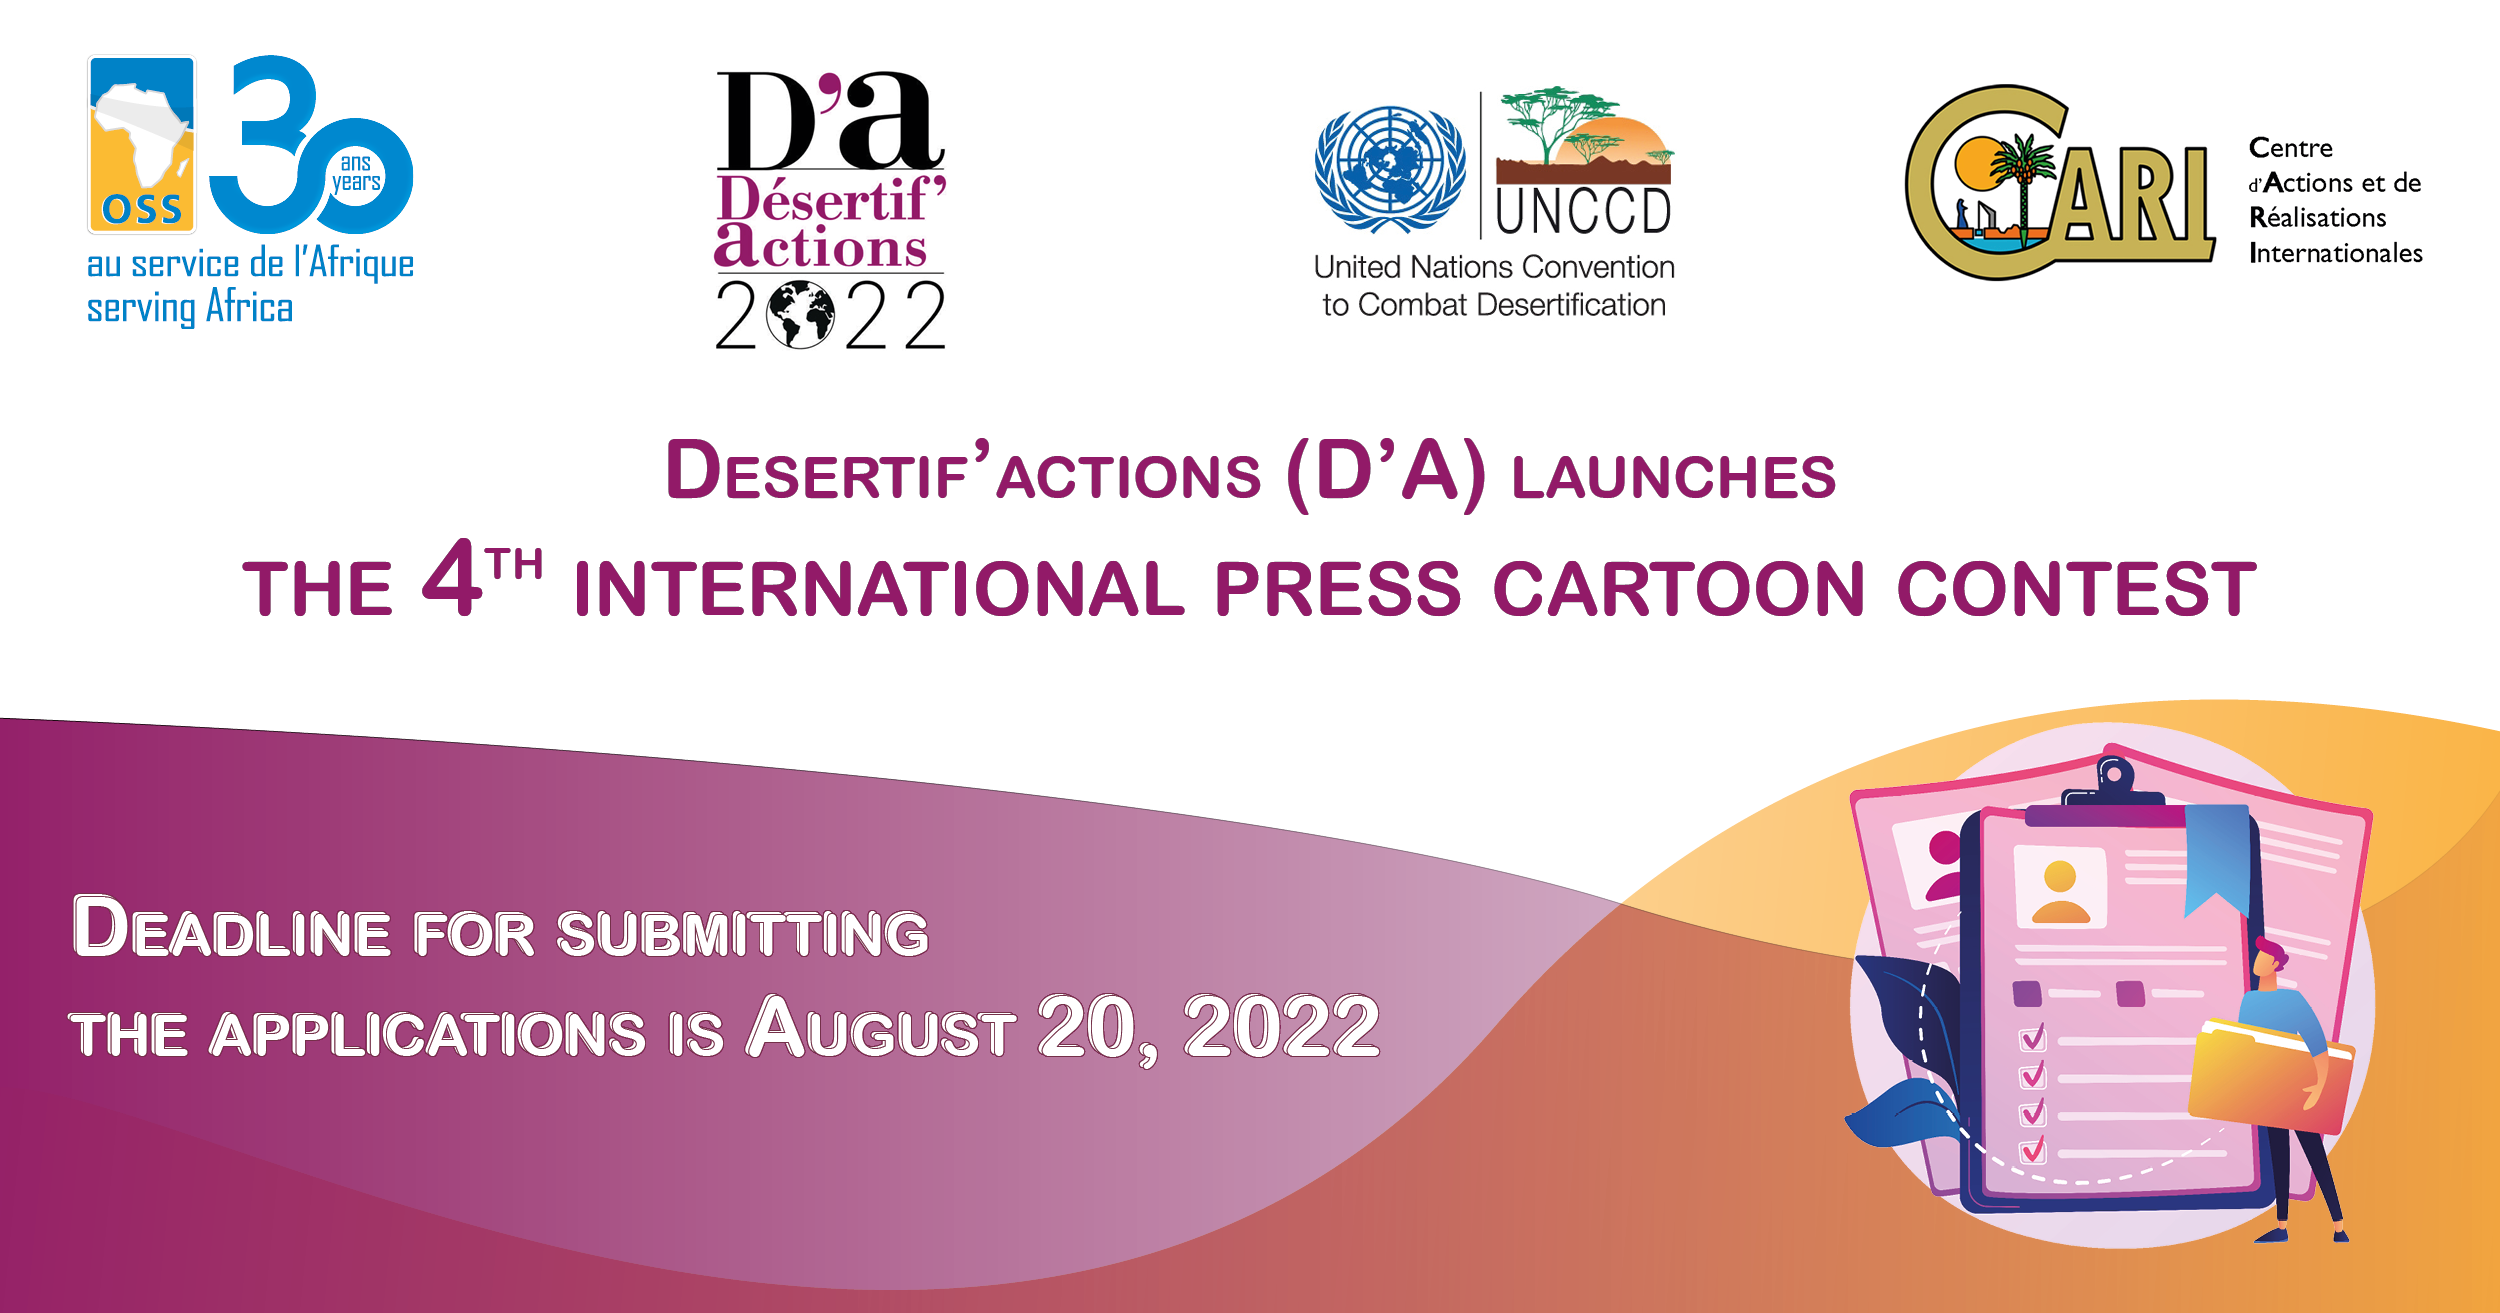  Desertif’actions (D’A) launches the 4th international press cartoon contest. Deadline for submitting the applications is August 20, 2022.